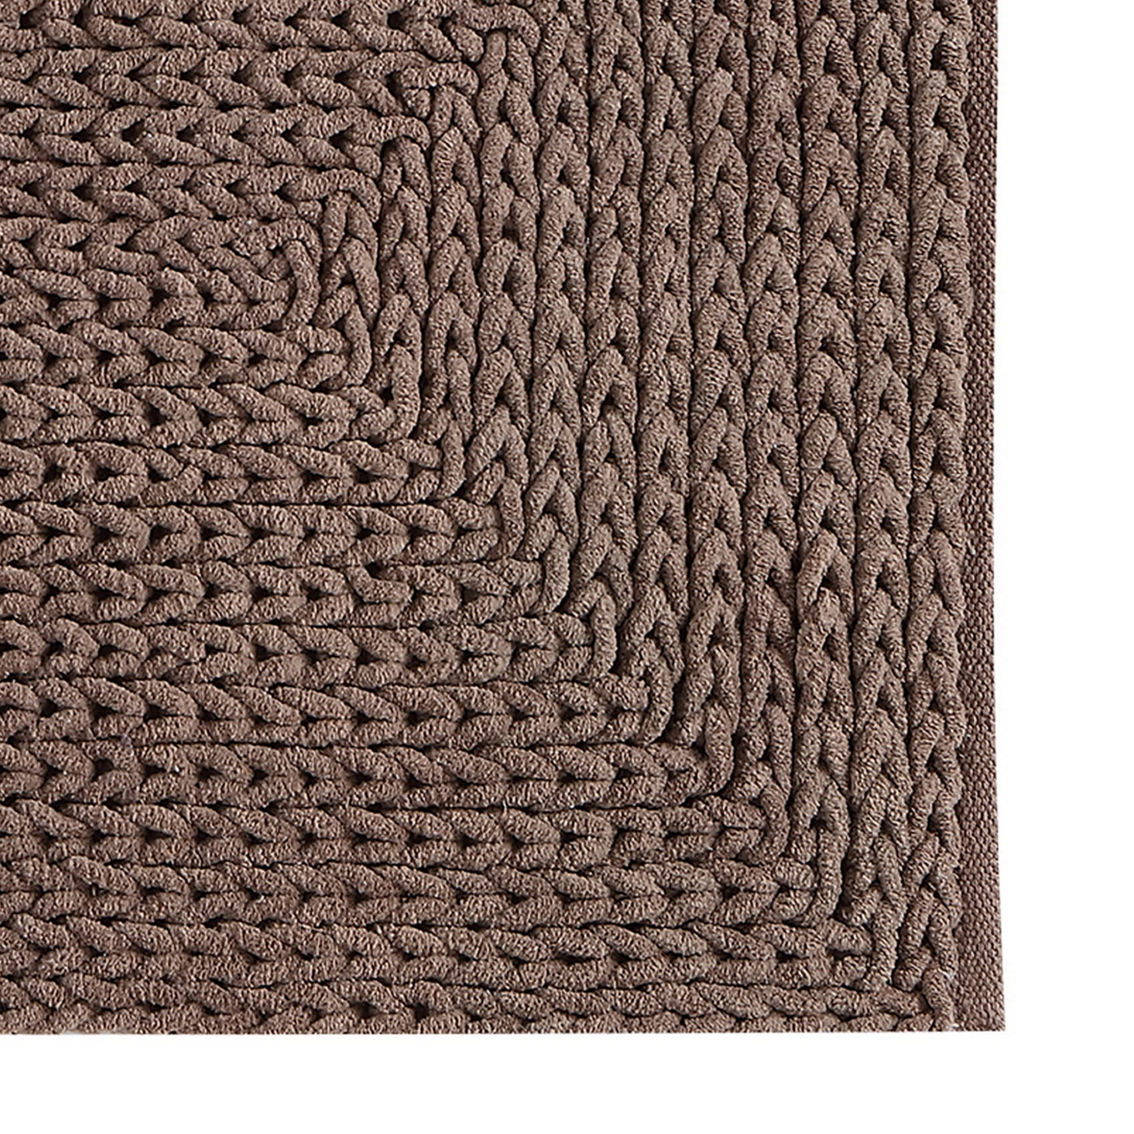 VCNY Home Barron Cotton Chenille Braided Runner Rug - Image 3 of 3